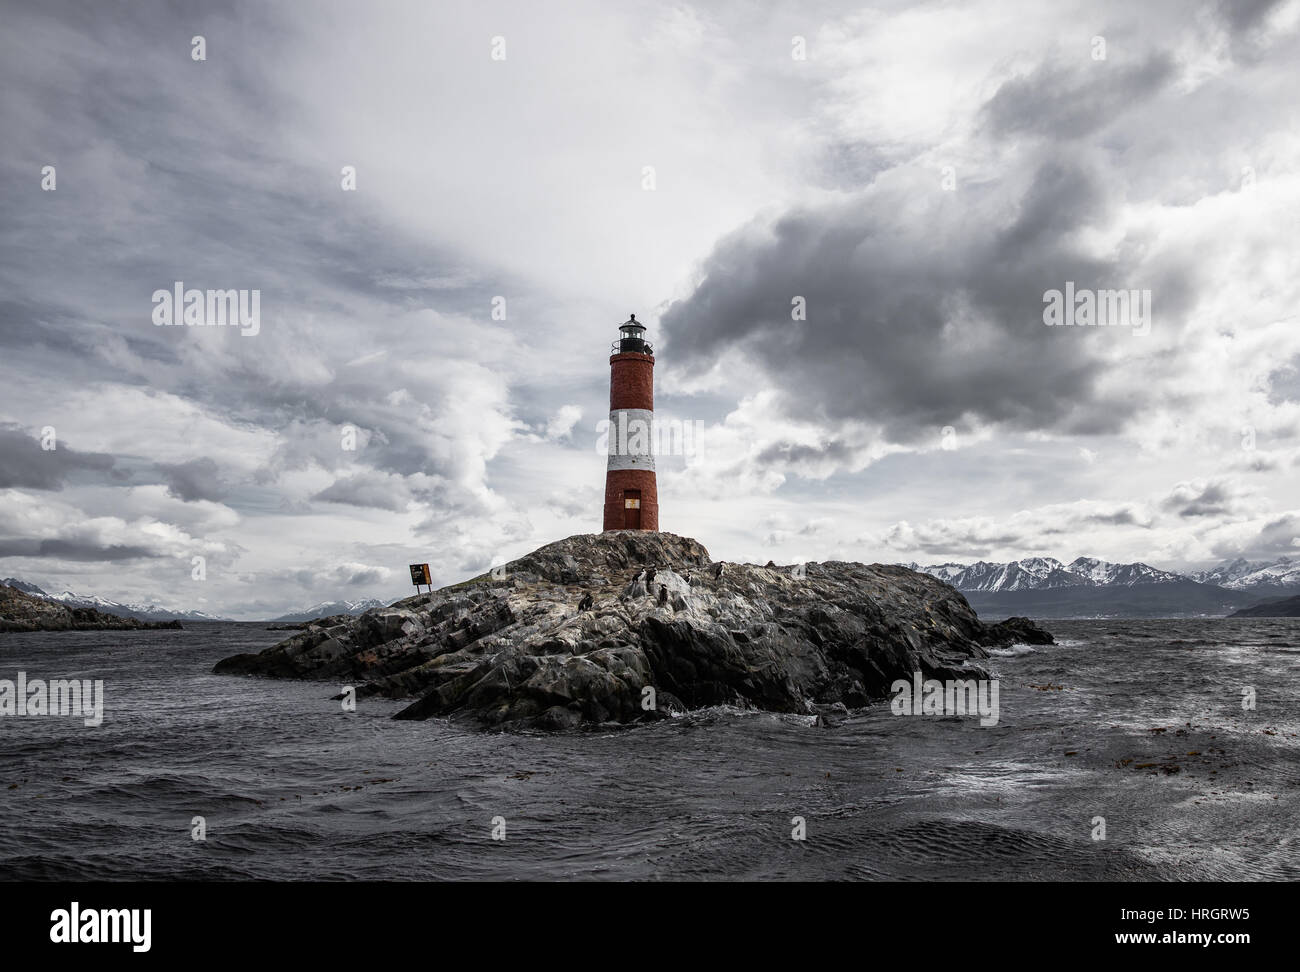 The Lighthouse at the End of the World Stock Photo